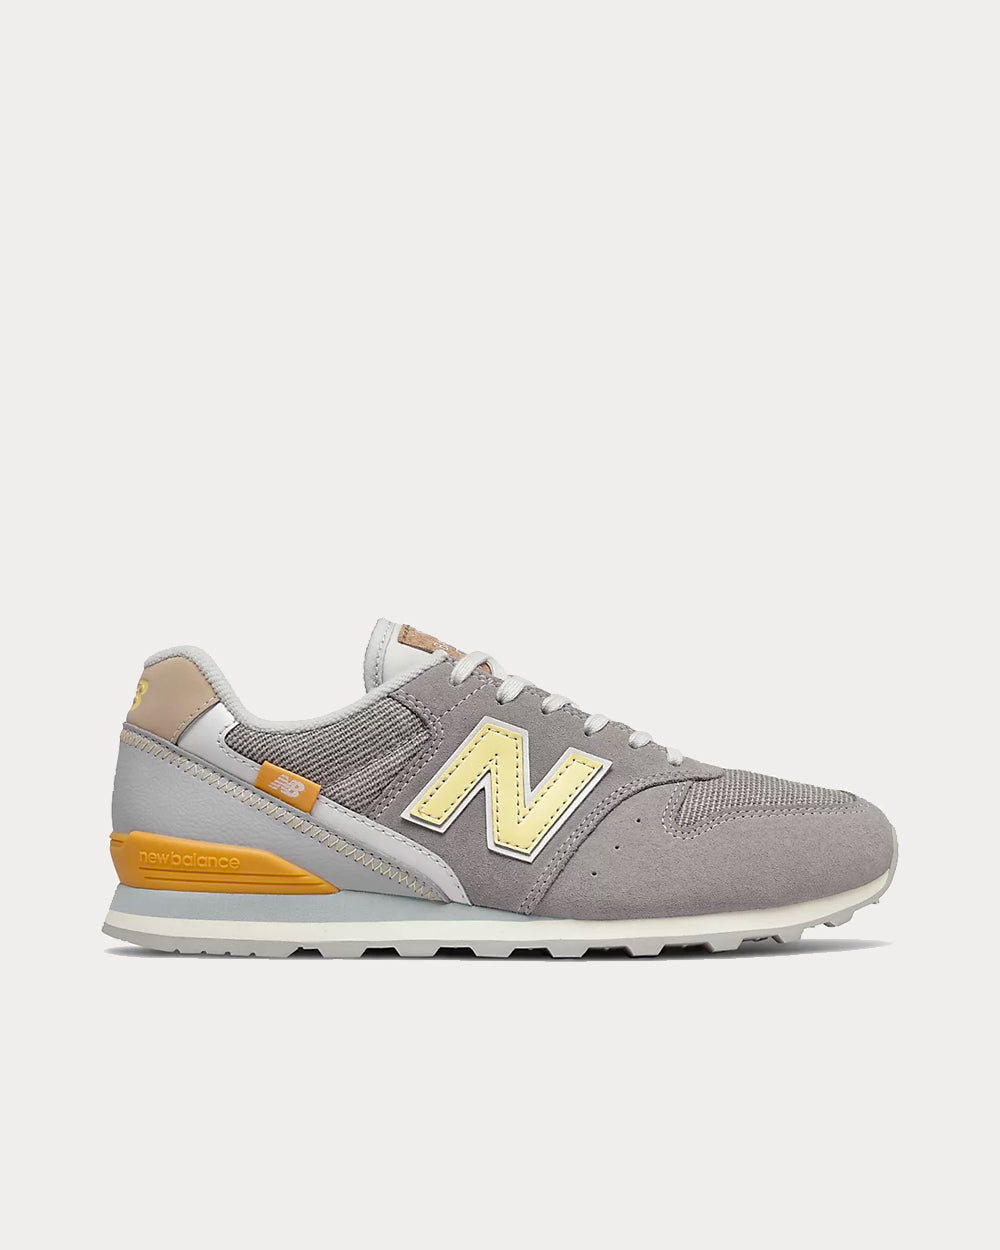 New 996 Marblehead with Haze Top Sneakers - Sneak in Peace